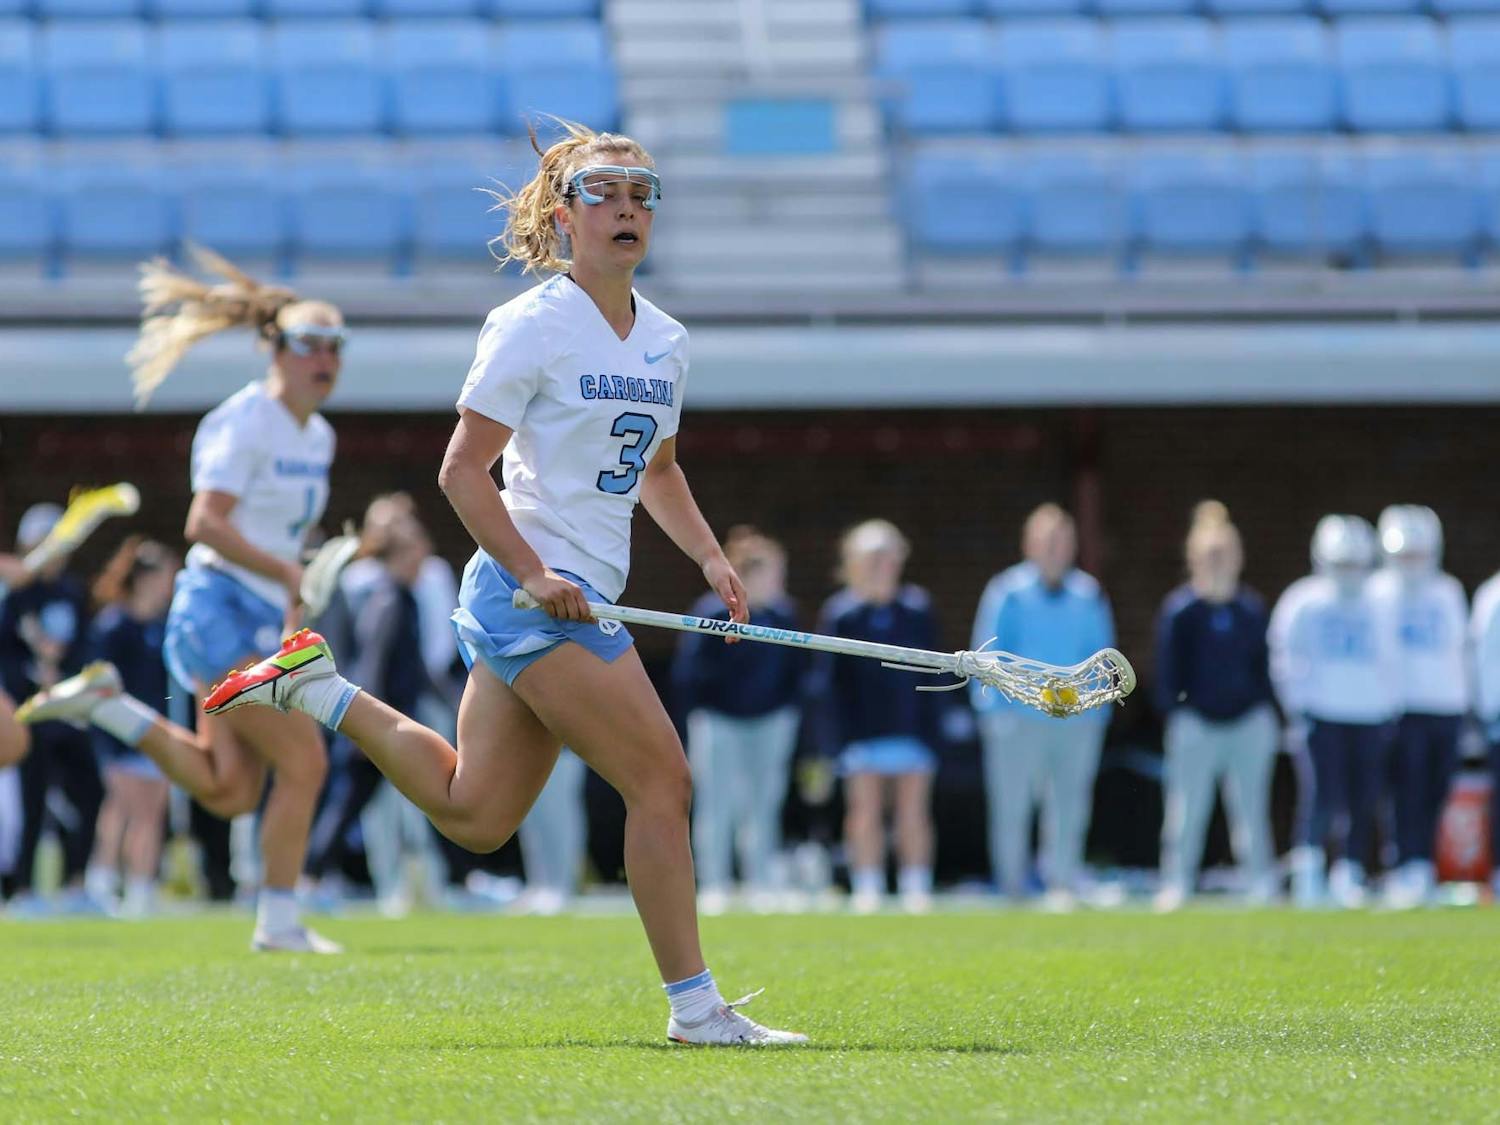 DTH File. UNC fifth-year attacker Jamie Ortega (3) carries the ball downfield against Virginia Tech on Saturday, March 26, 2022, at Dorrance Field. UNC won 20-8.